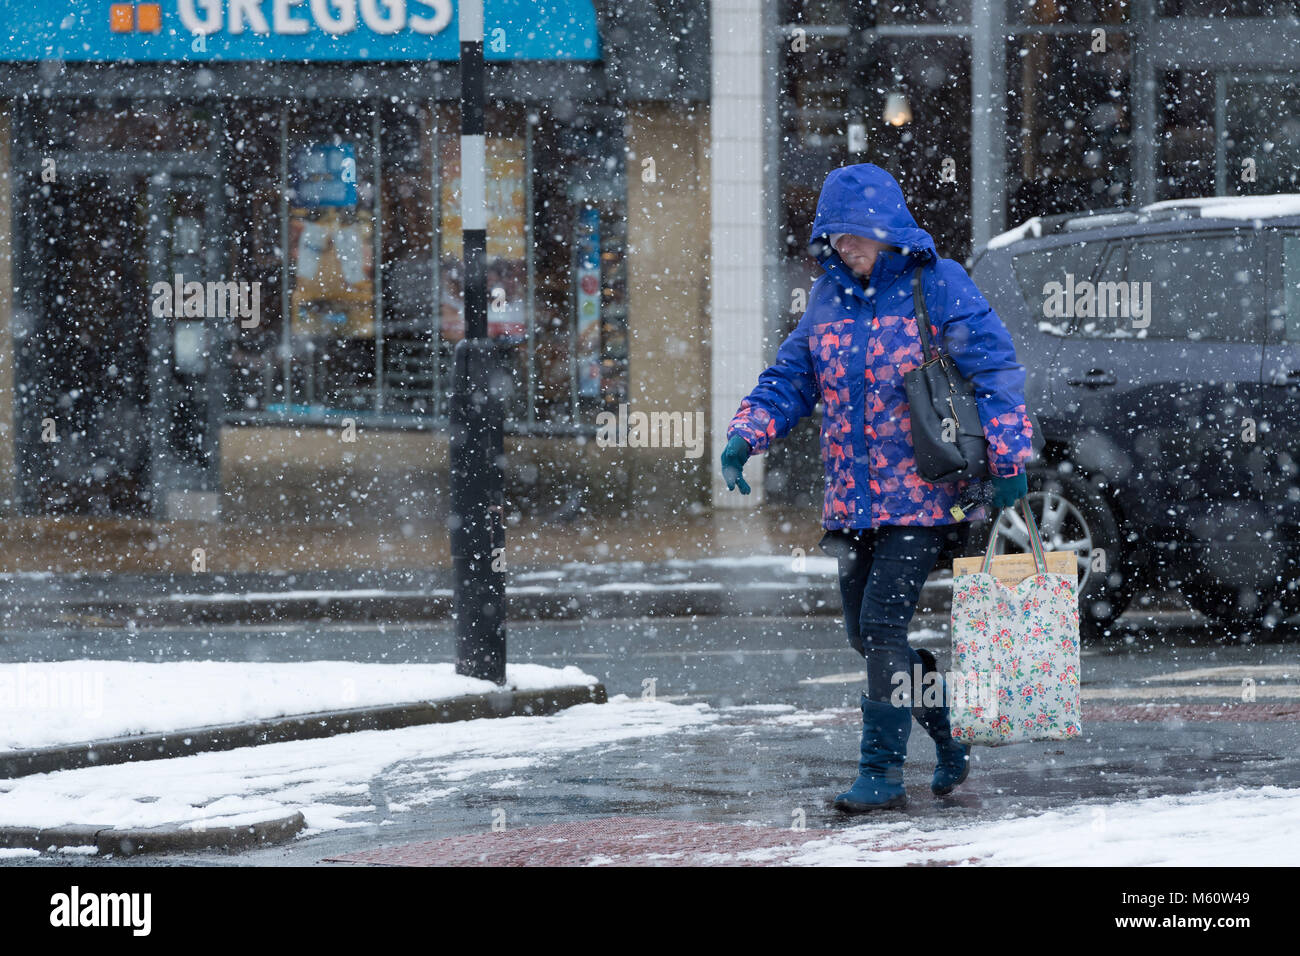 Ilkley, West Yorkshire. 27th Feb, 2018. UK Weather: A woman in Ilkley,  head bowed, dressed in winter clothing with hood up & wearing gloves & boots, is braving the falling snow whilst walking past shops on Brook Street. 27th February 2018, Ilkley, UK Credit: Ian Lamond/Alamy Live News Stock Photo